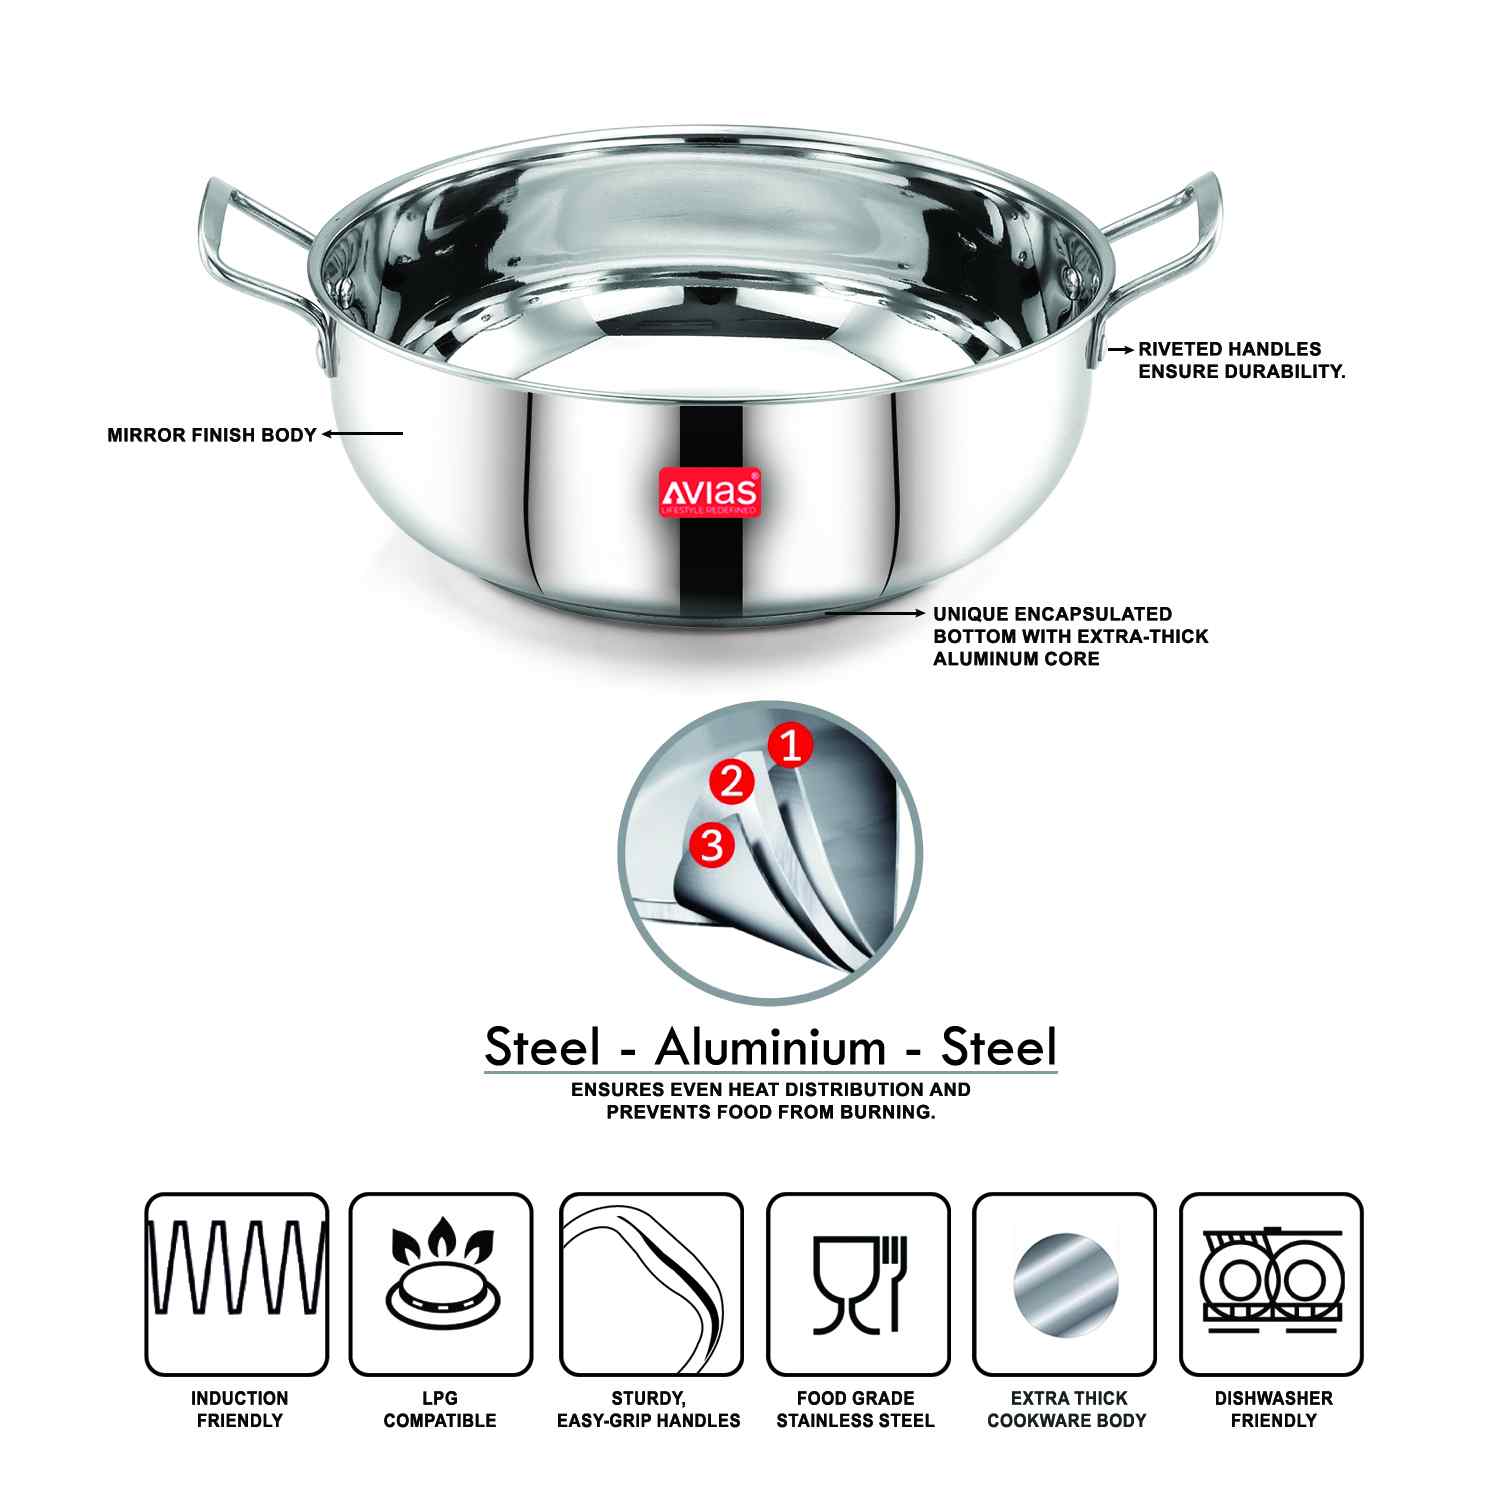 AVIAS Inox IB stainless steel kadai features and compatibility